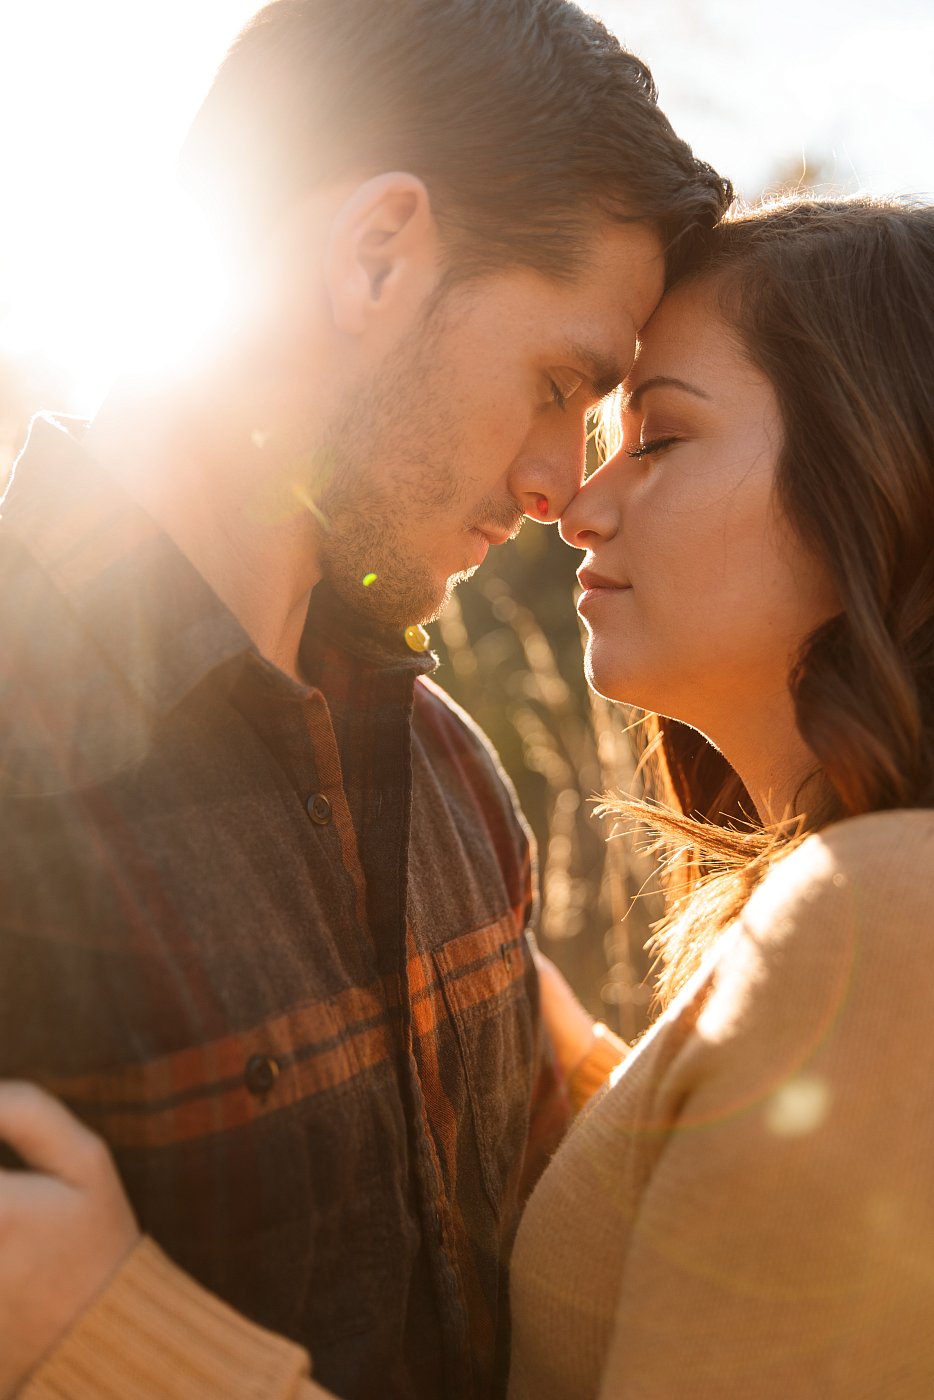 5 Tips for Making the Most of your Engagement Session!